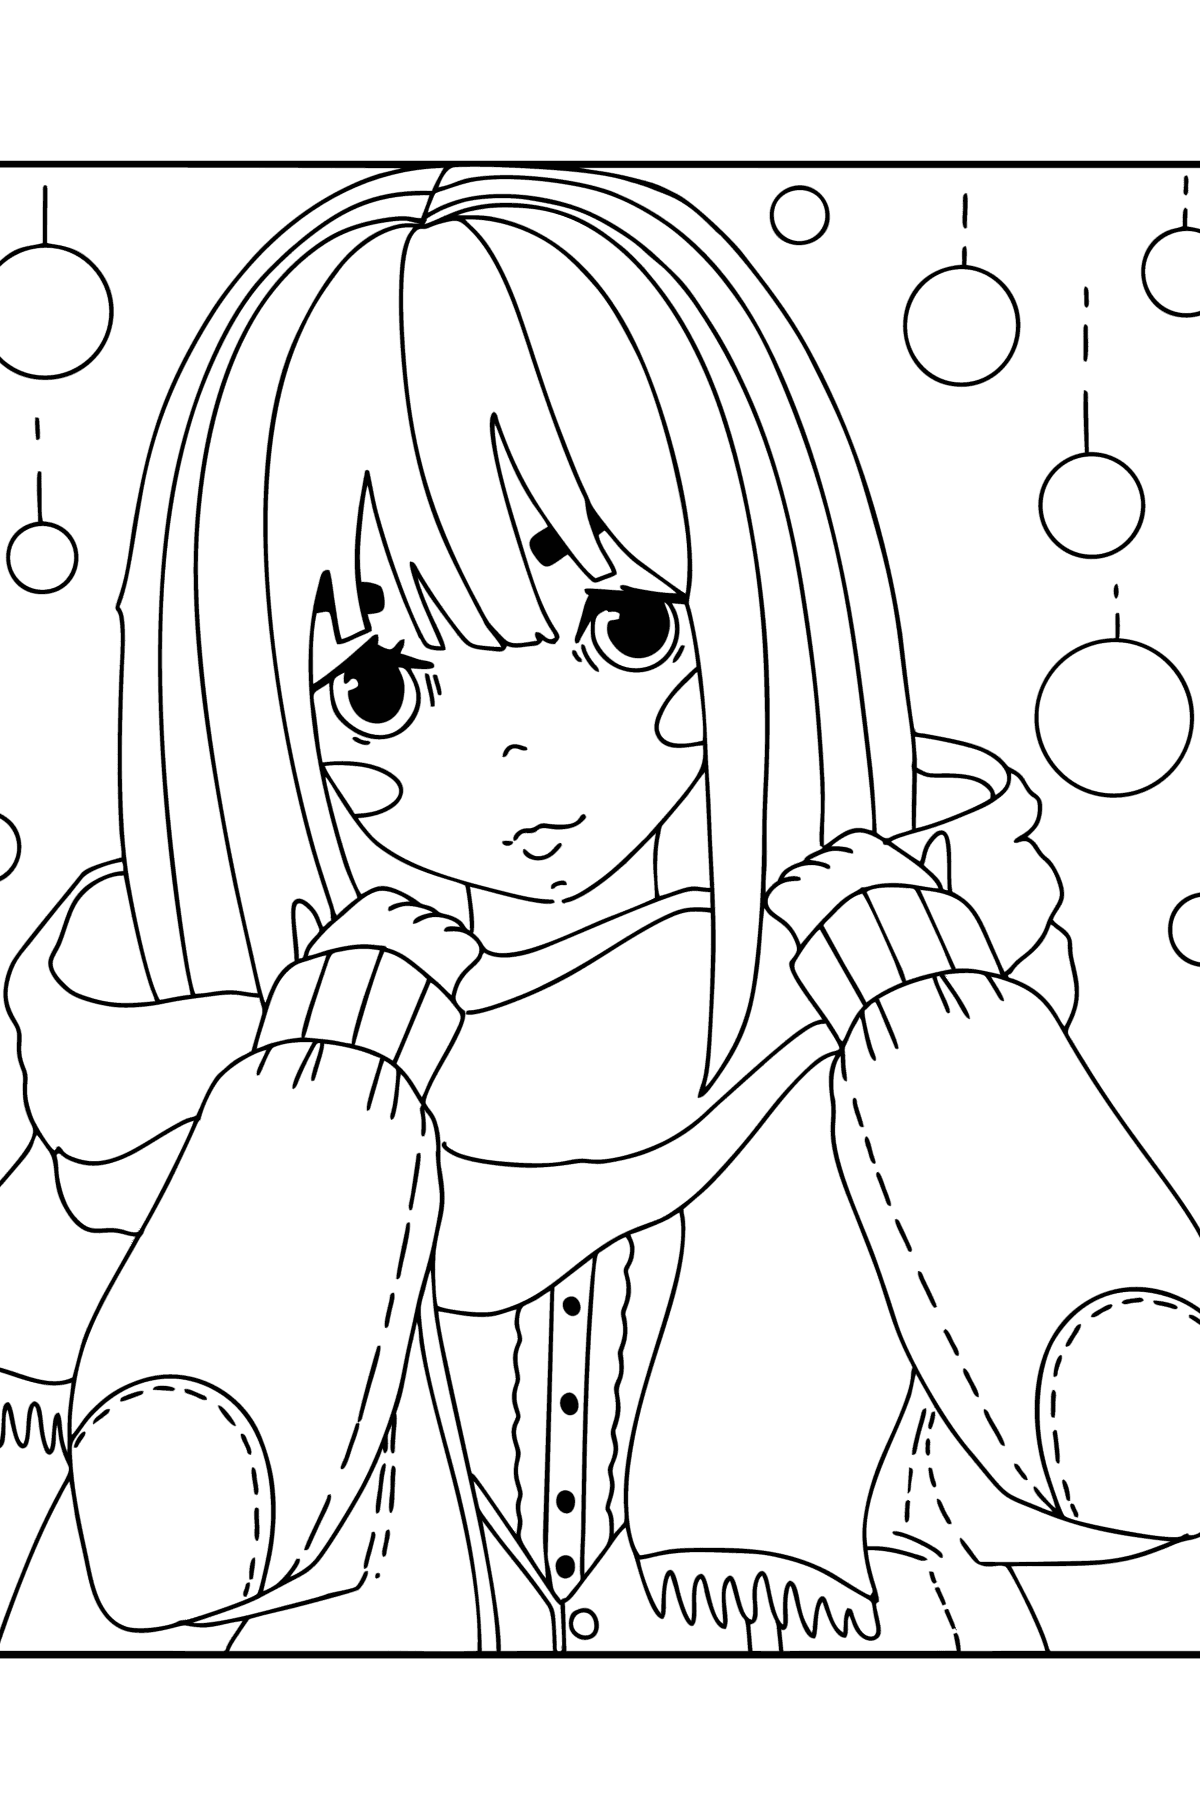 Cool anime girl coloring page ♥ Online and Print for Free!